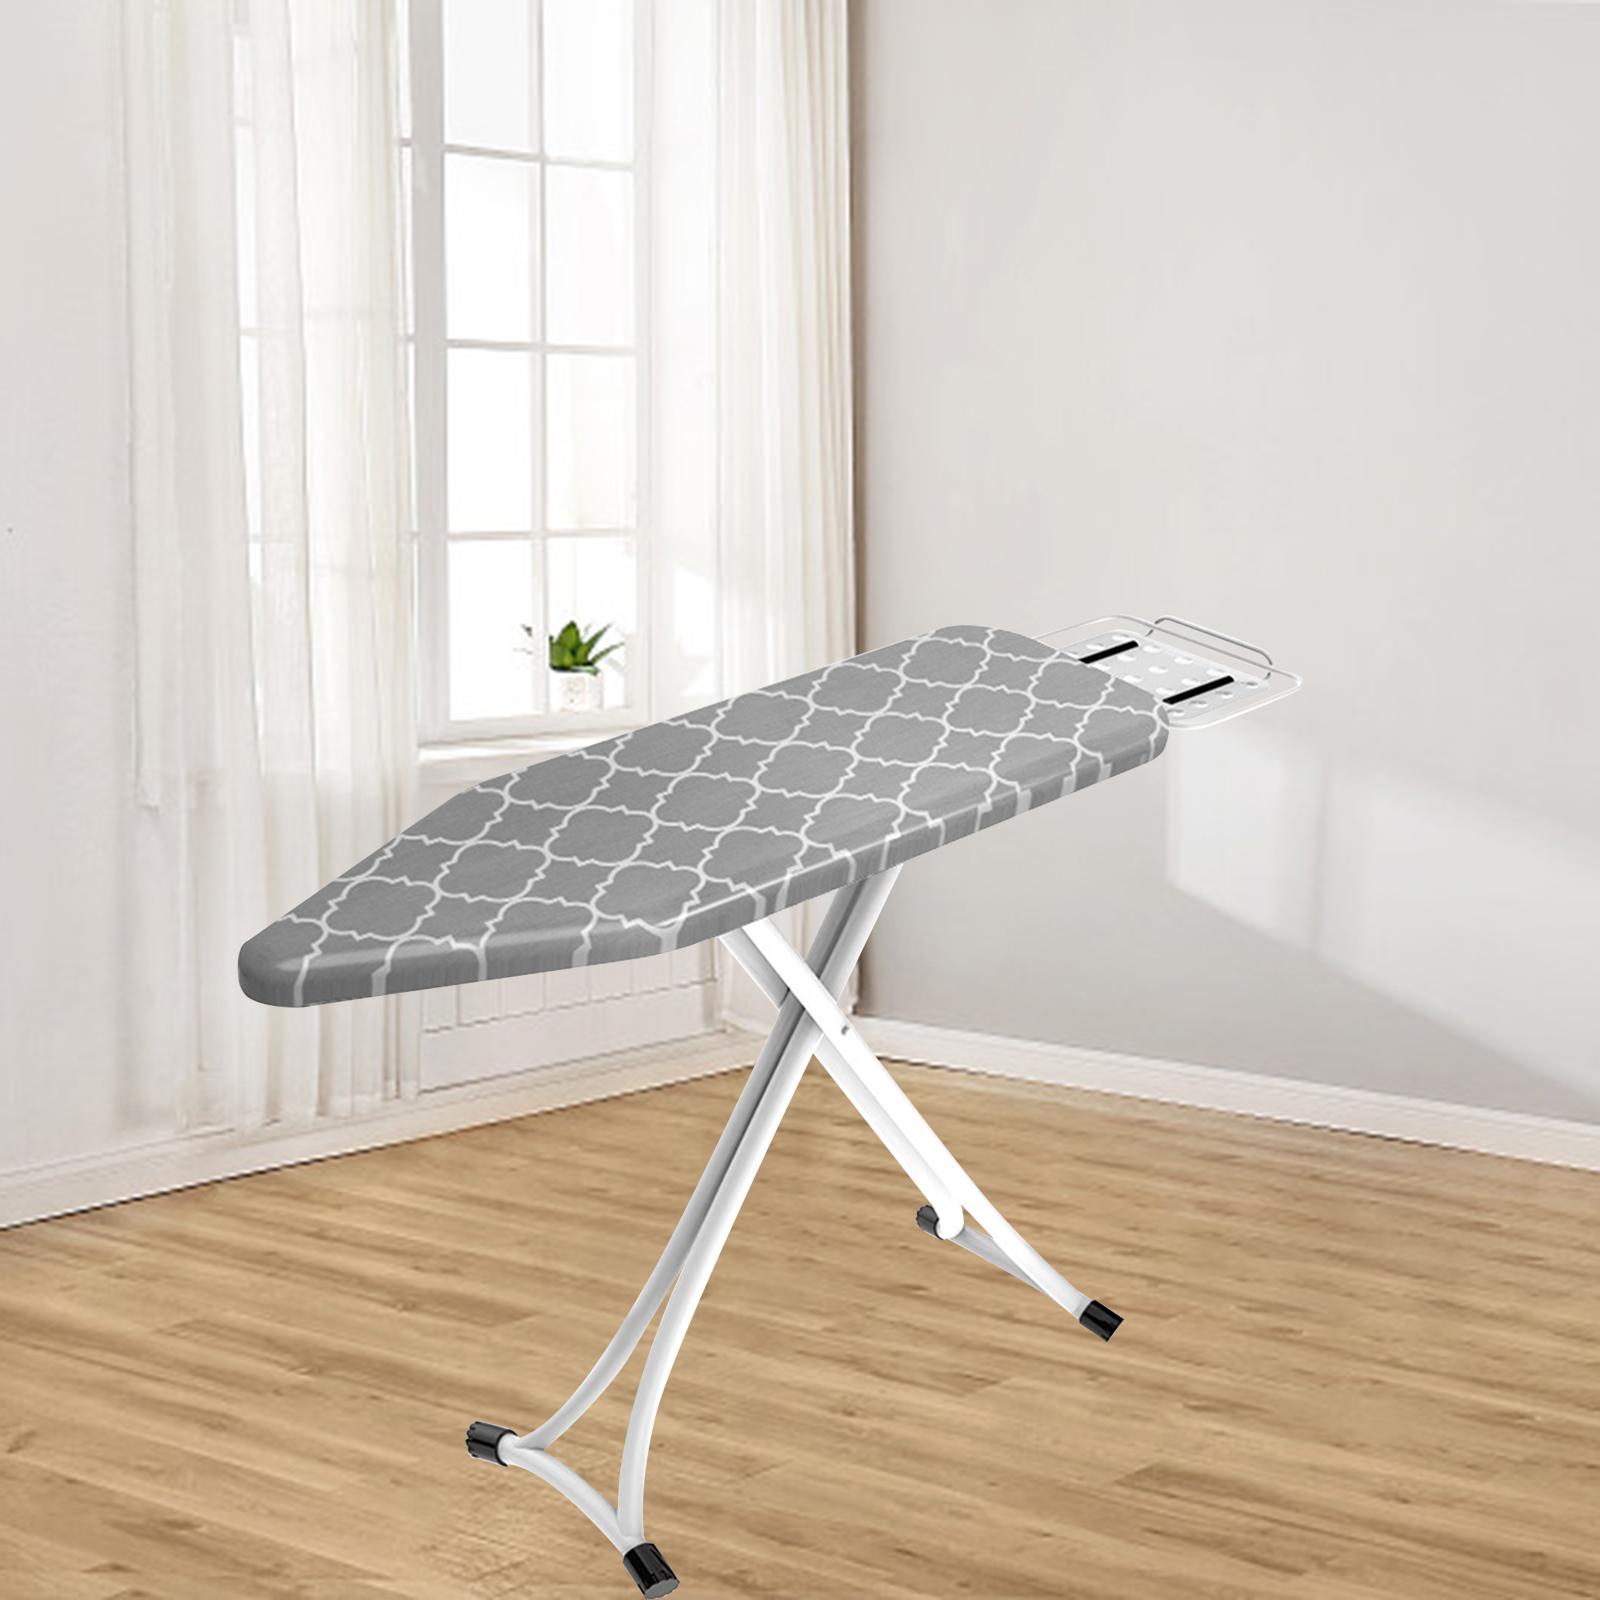 Elastic Ironing Table Cover Protector Resists Scorching 120Cmx41cm Blanket  Pad Heat Insulation Cotton Ironing Board Cover Laundry Supplies , StyleD 